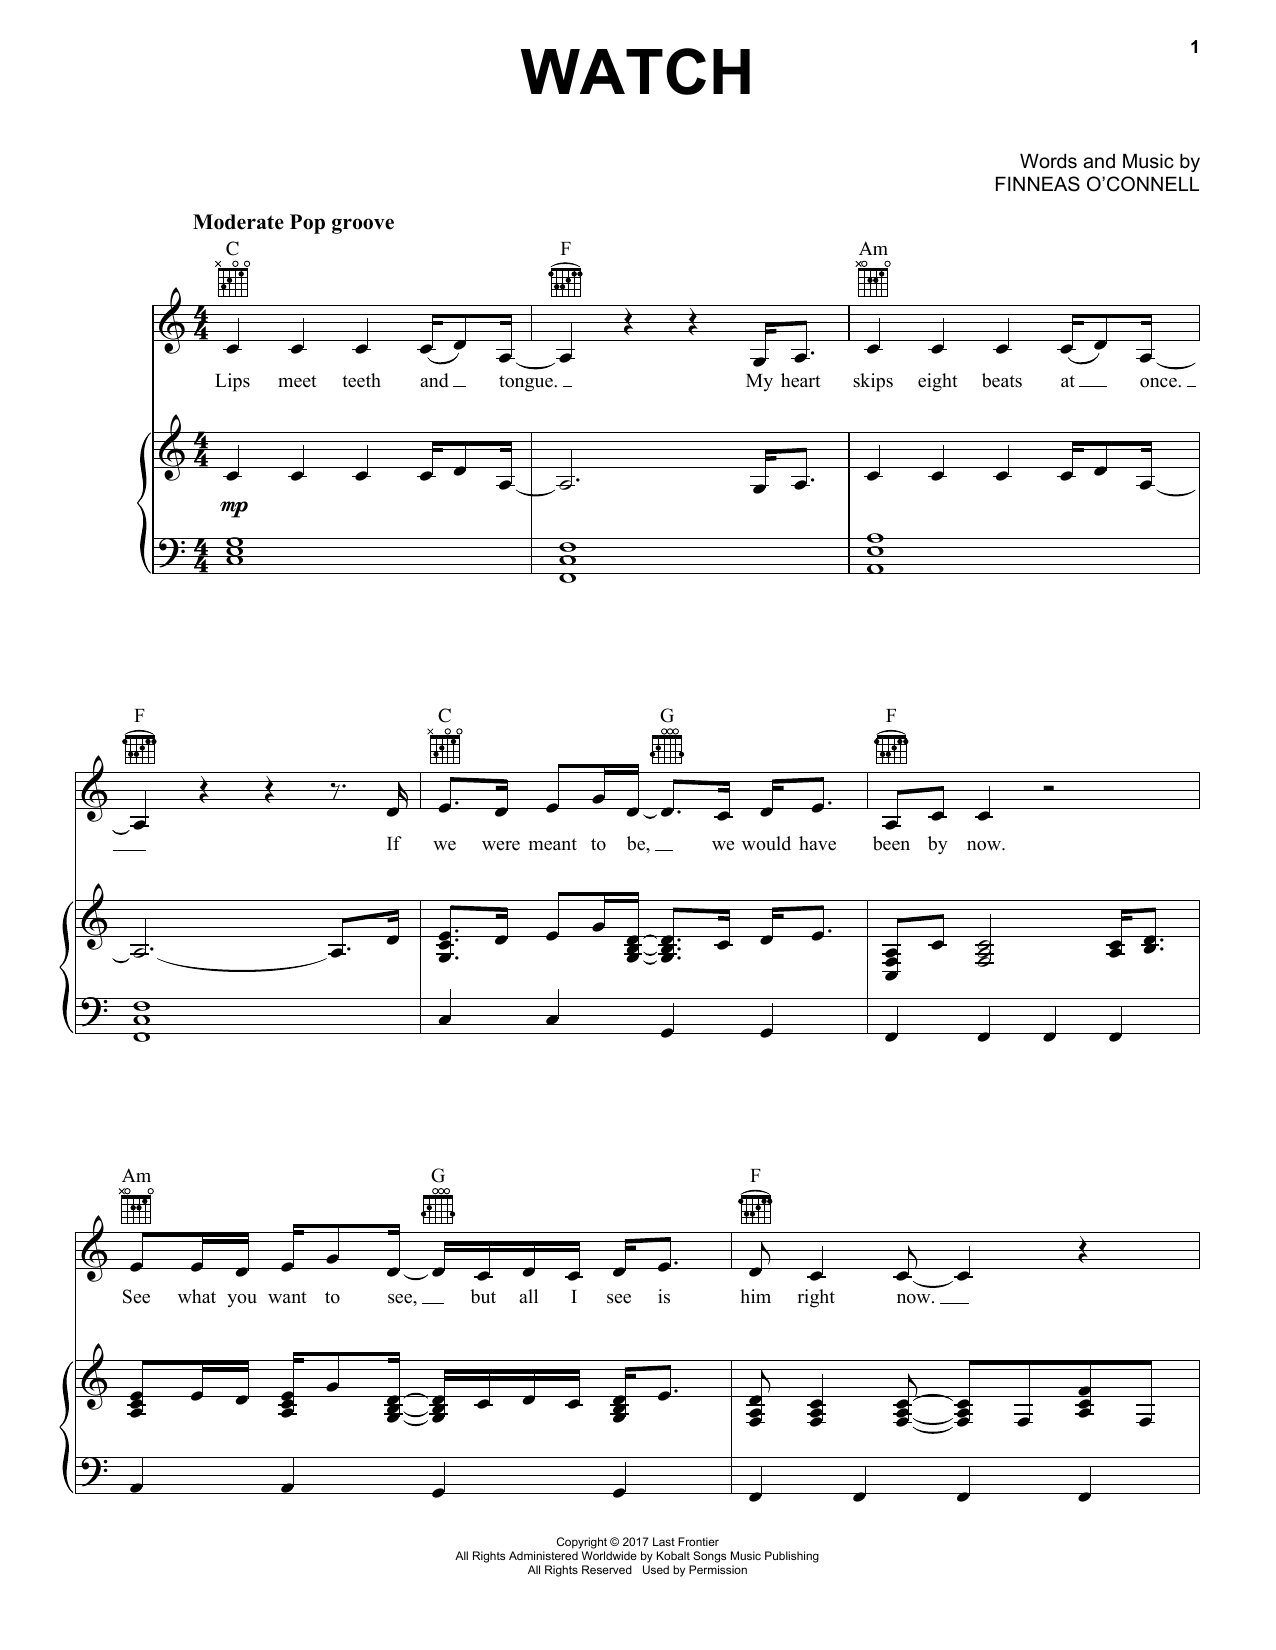 piano chords for pop songs